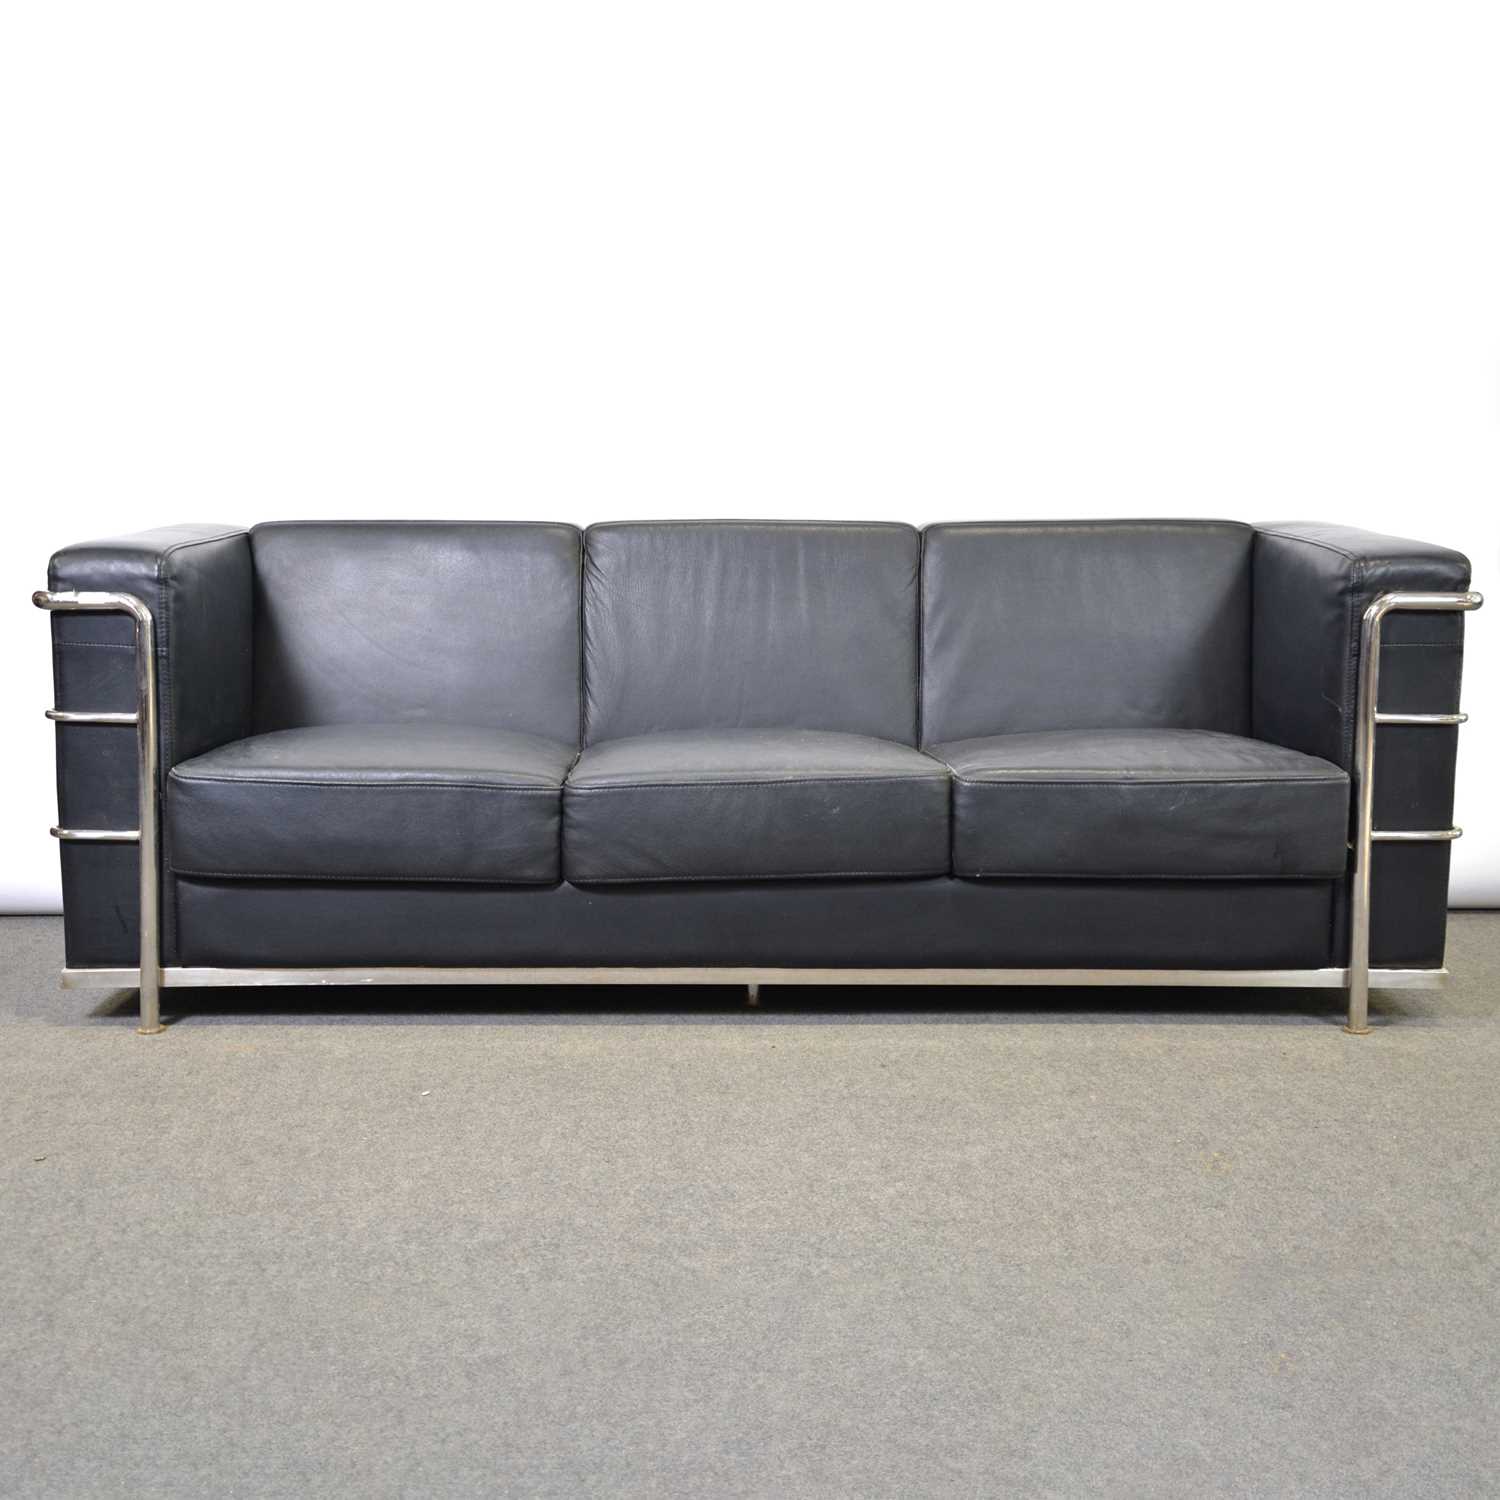 Lot 456 - Chrome and leather sofa after Le Corbusier